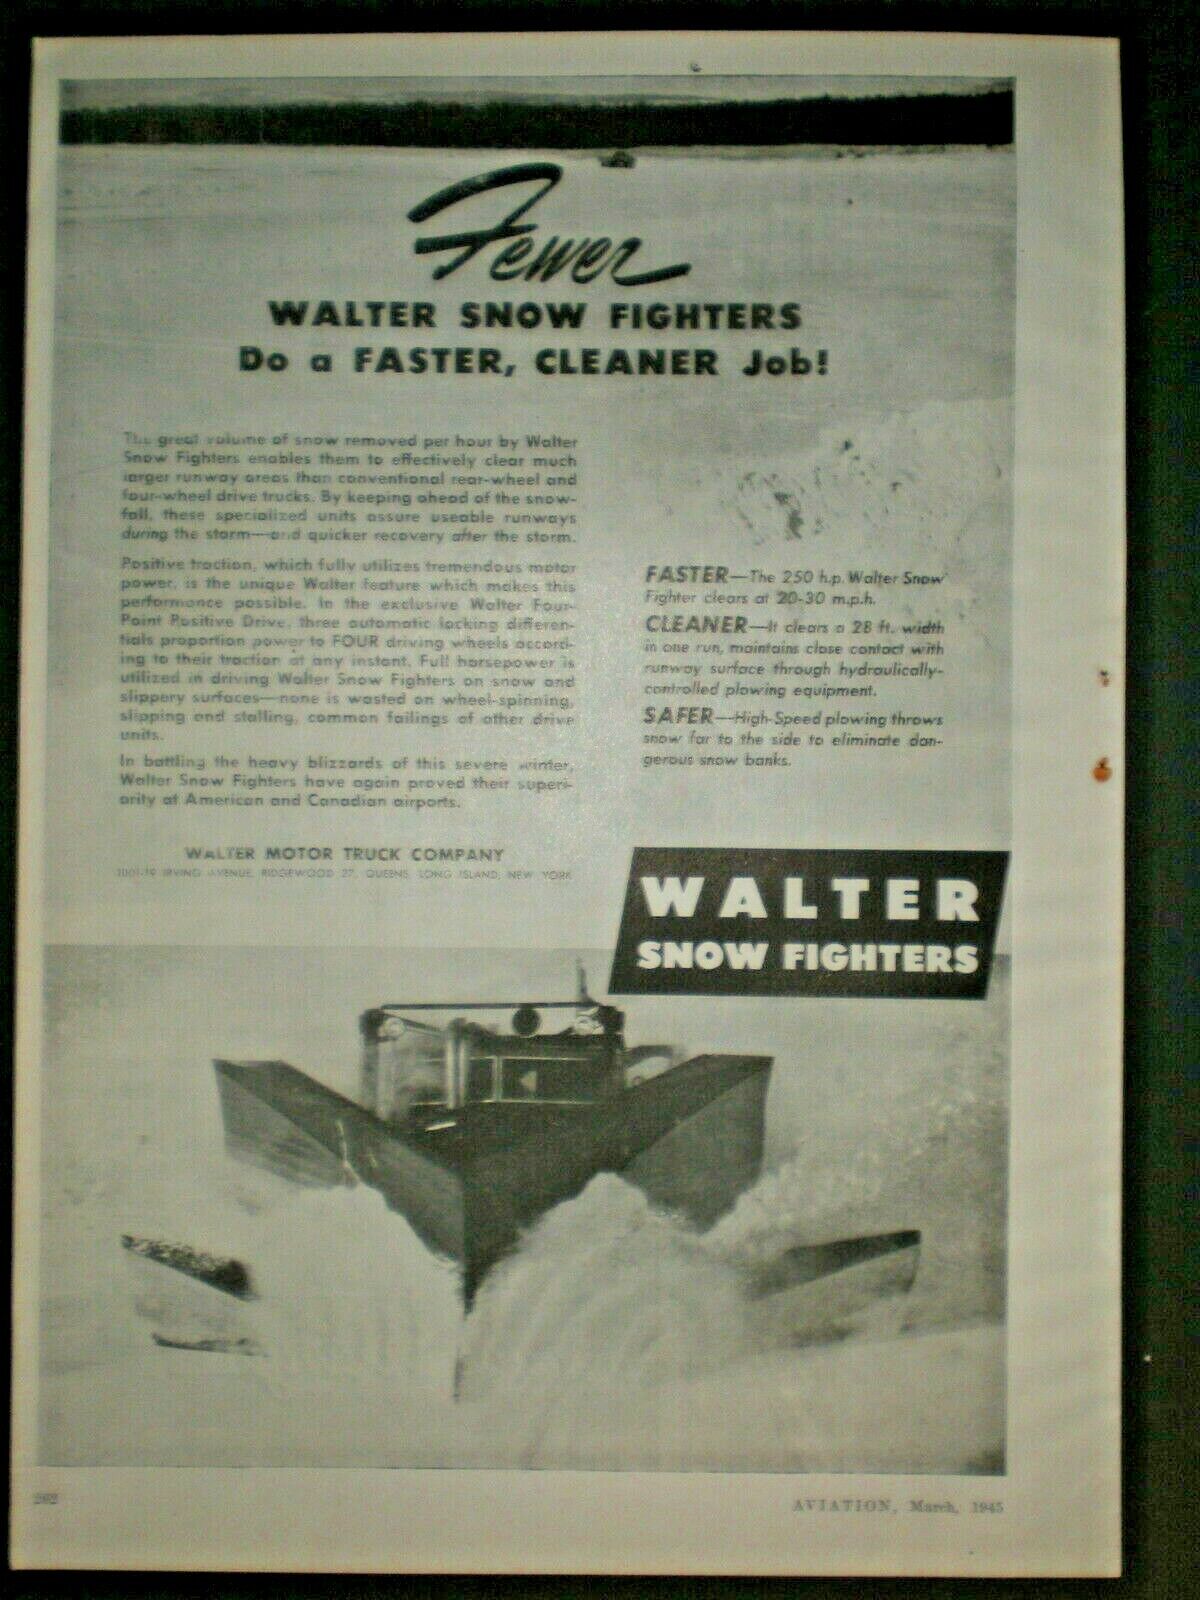 1945 WALTER SNOW FIGHTERS vintage SNOW PLOWS  Trade print ad